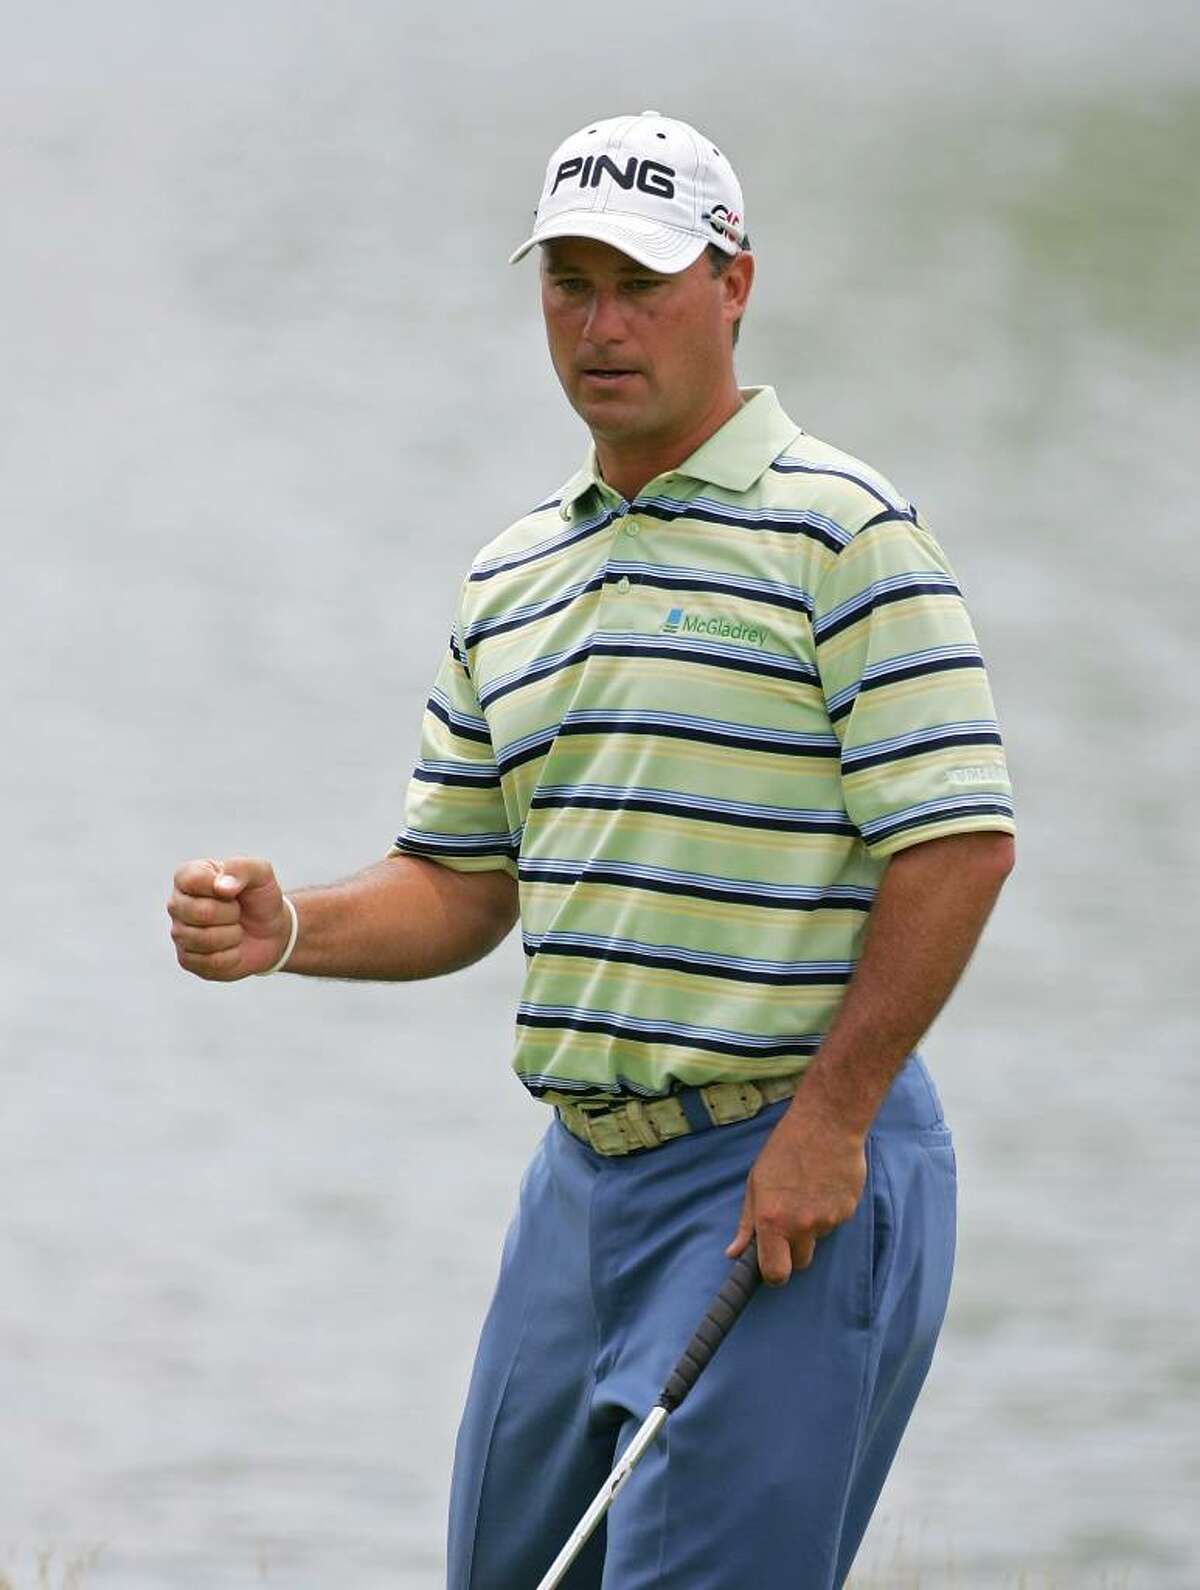 CROMWELL, CT - JUNE 26: Chris DiMarco celebrates his birdie on the 17th green during the third round of the Travelers Championship held at TPC River Highlands on June 26, 2010 in Cromwell, Connecticut. (Photo by Michael Cohen/Getty Images) *** Local Caption *** Chris DiMarco